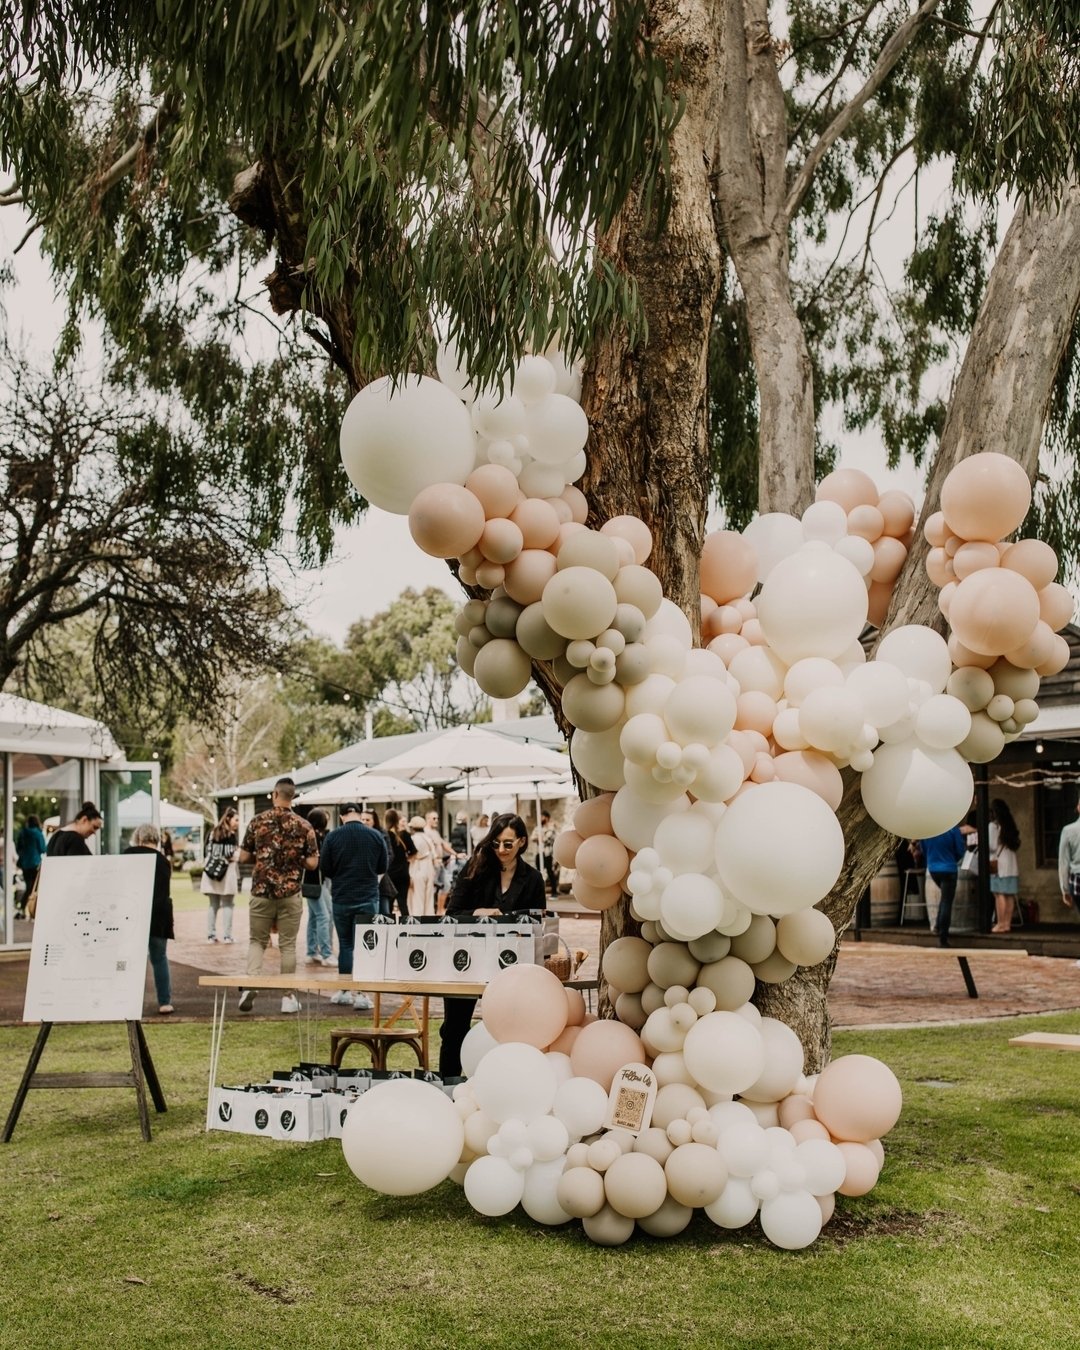 Still in love with our 2022 entry statement by @burst.away 🤩  @loveshackweddings our event photographer 🥰 ​​​​​​​​ 

#welovelove #fromthisday #wedding #southwestwedding #marrydownsouth #margaretriver #dunsborough #yallingup #busselton #downsouth #w